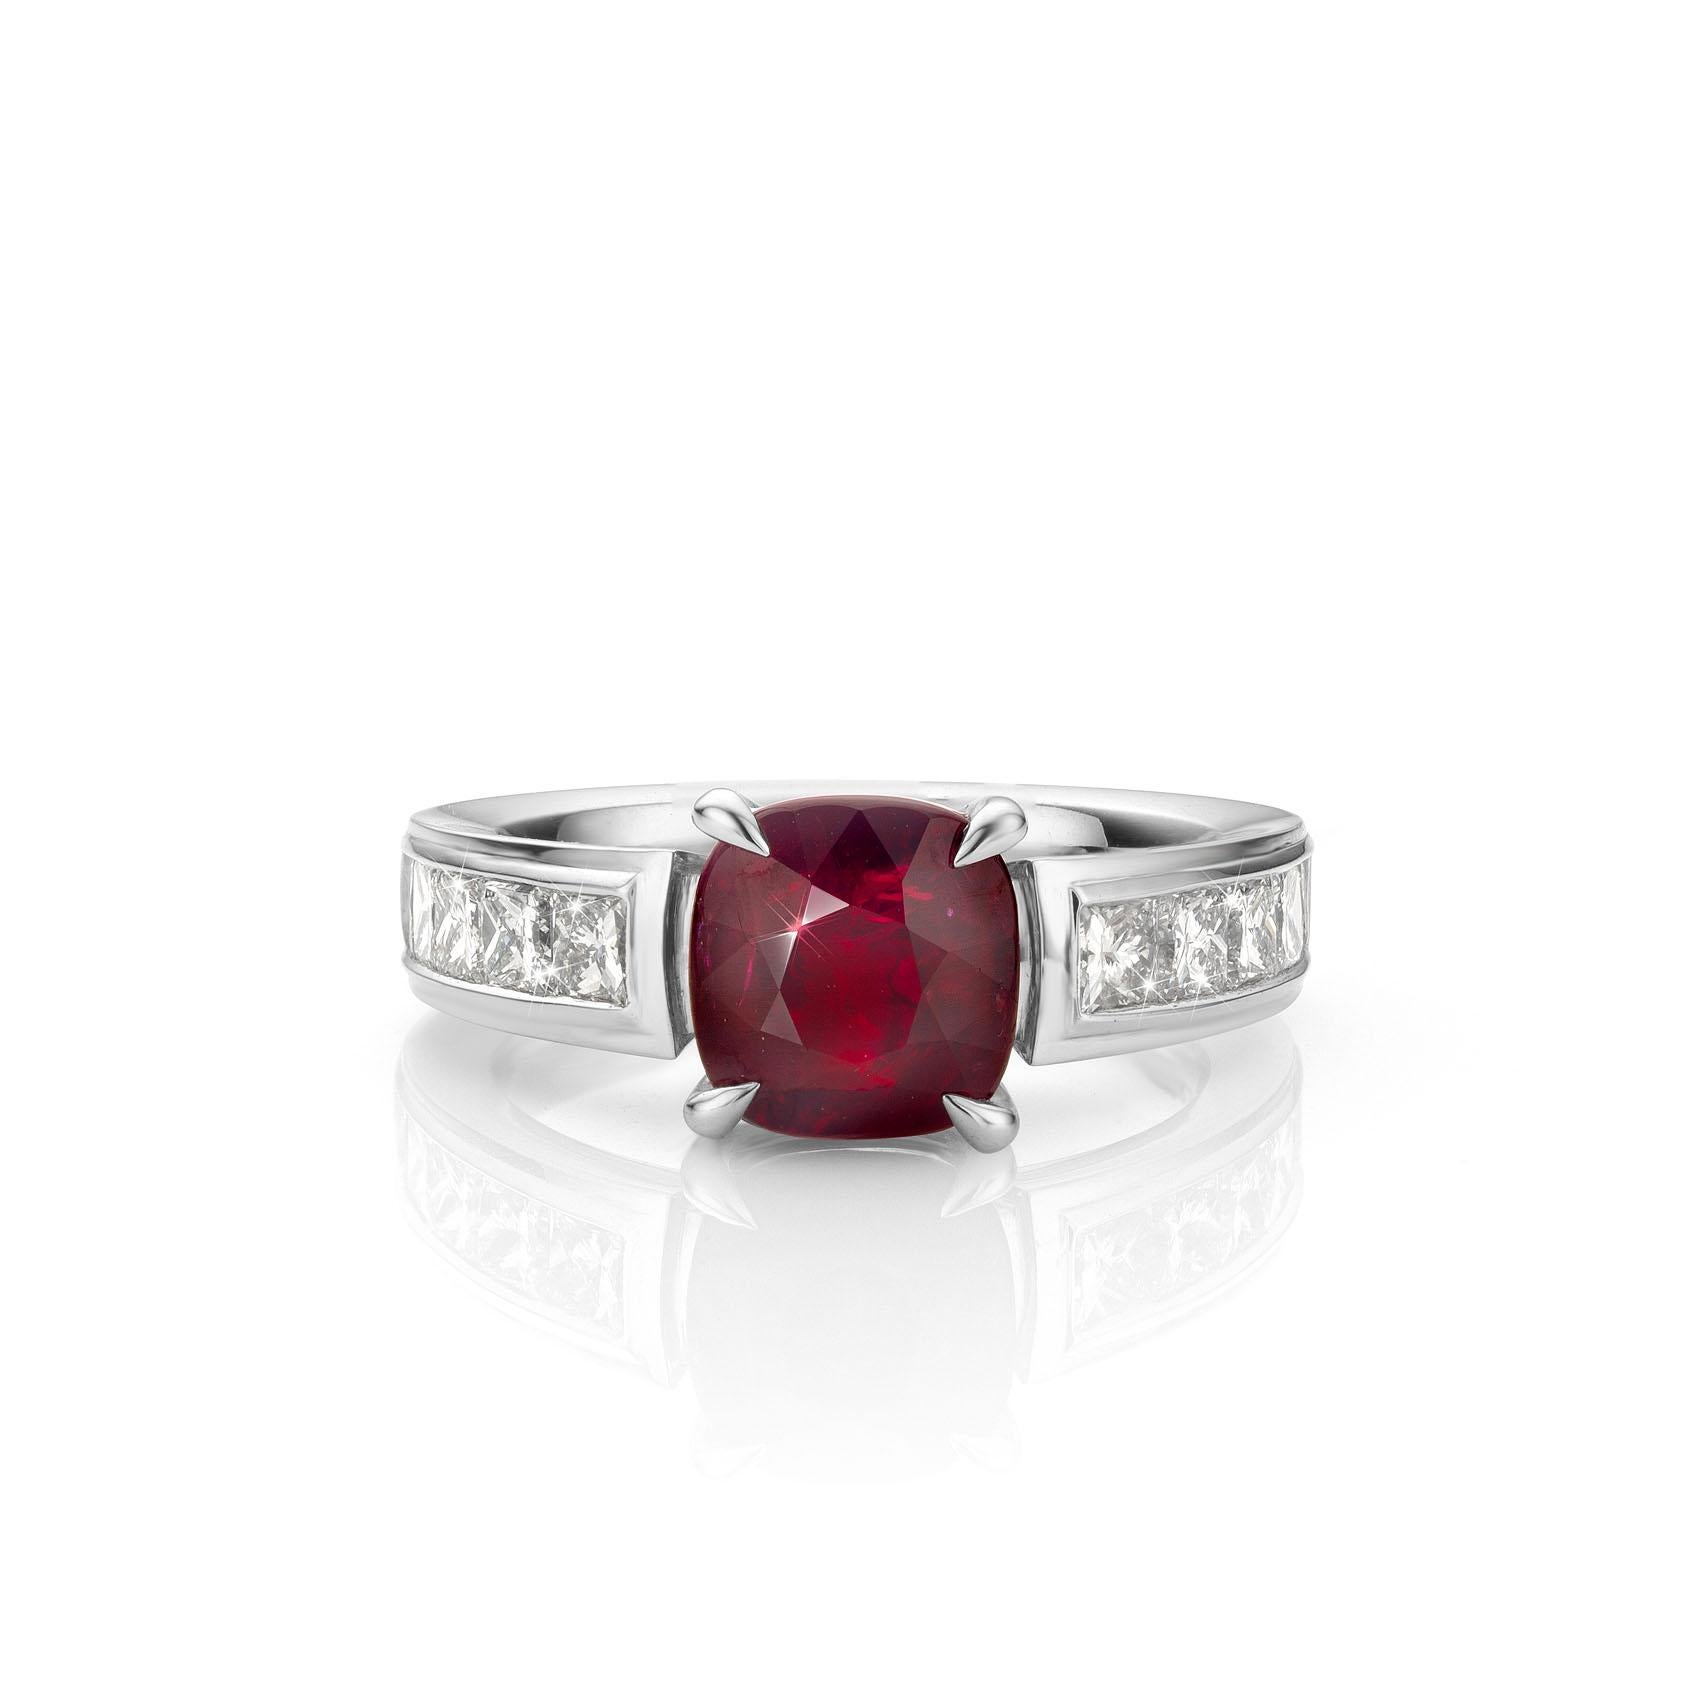 For Sale:  Cober Jewellery with 3.03 Carat Ruby  1.60 Carat total Diamonds White Gold Ring  6